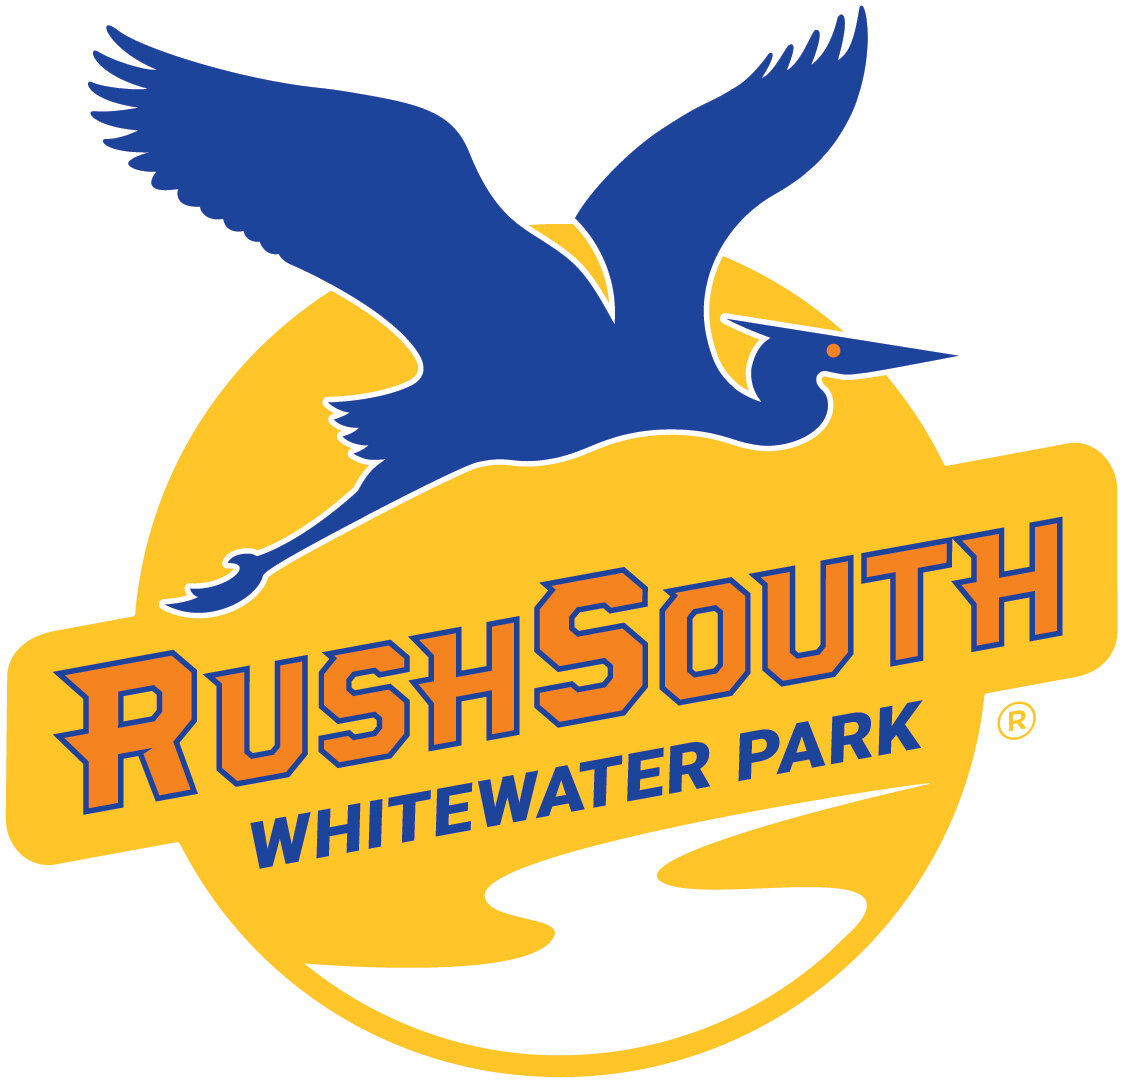 RushSouth Whitewater Park